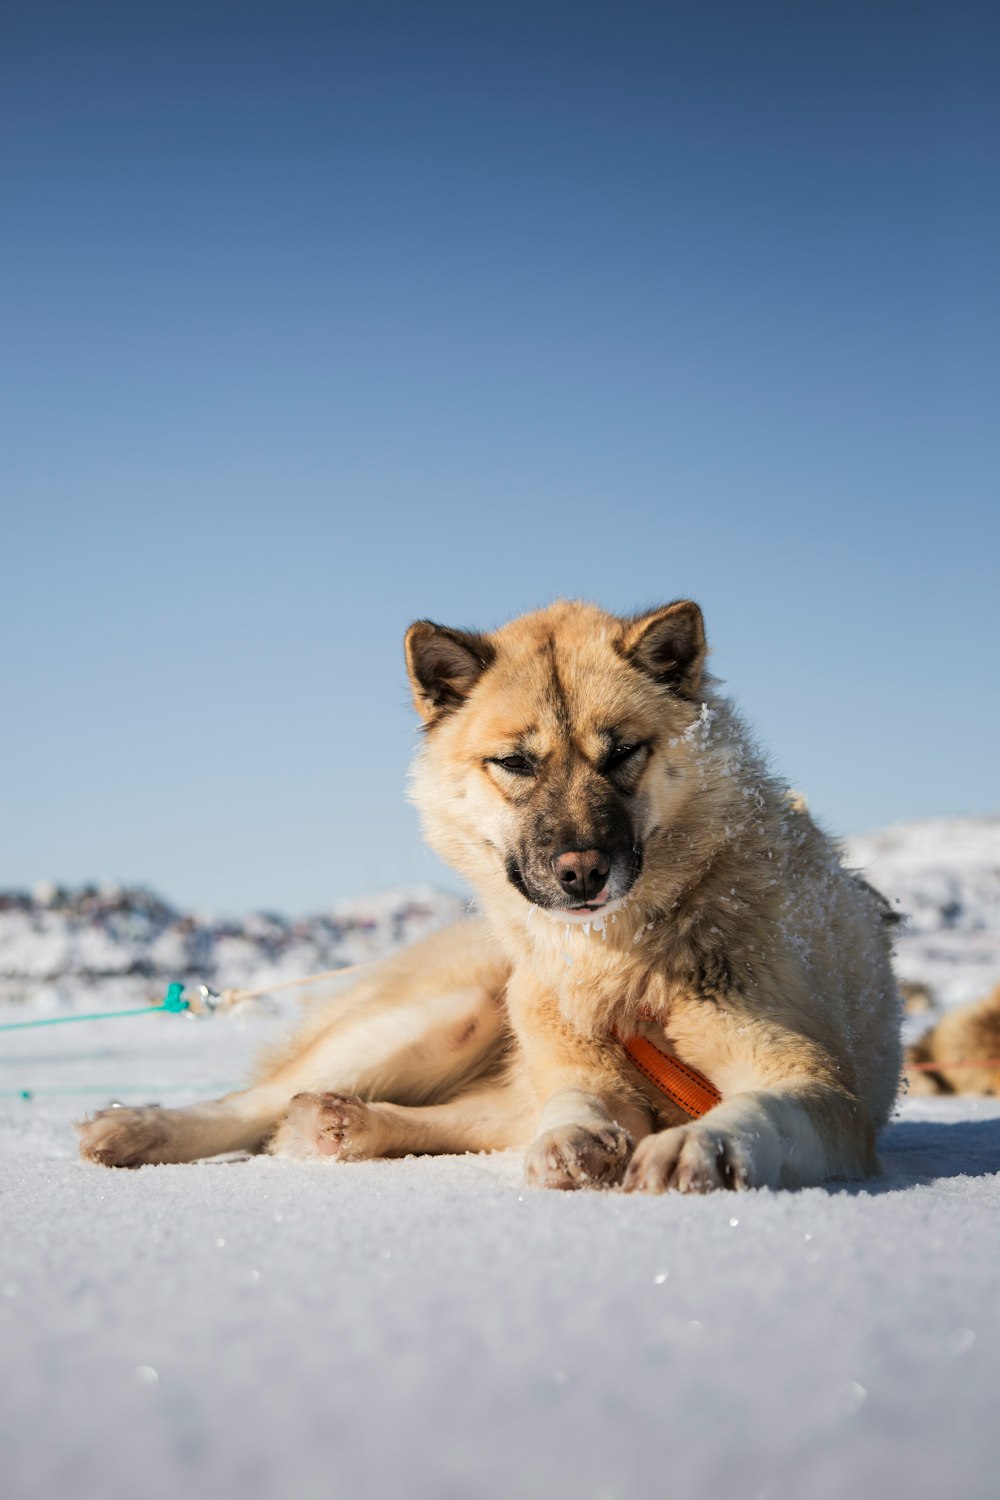 brown and white short coated dog lying on snow covered ground during daytime